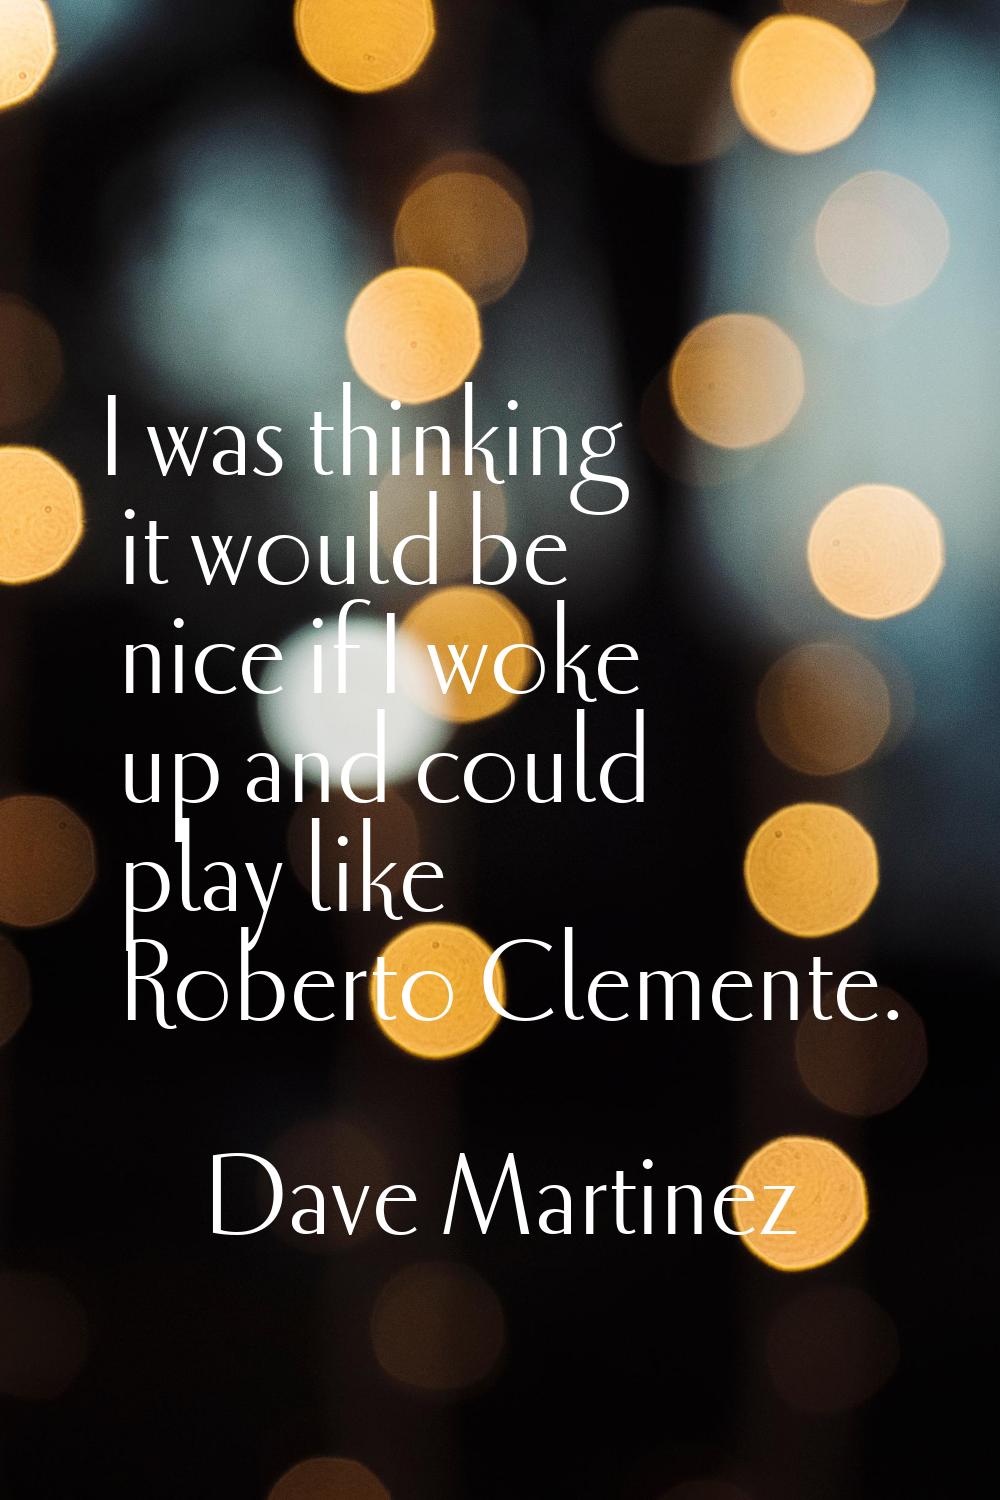 I was thinking it would be nice if I woke up and could play like Roberto Clemente.